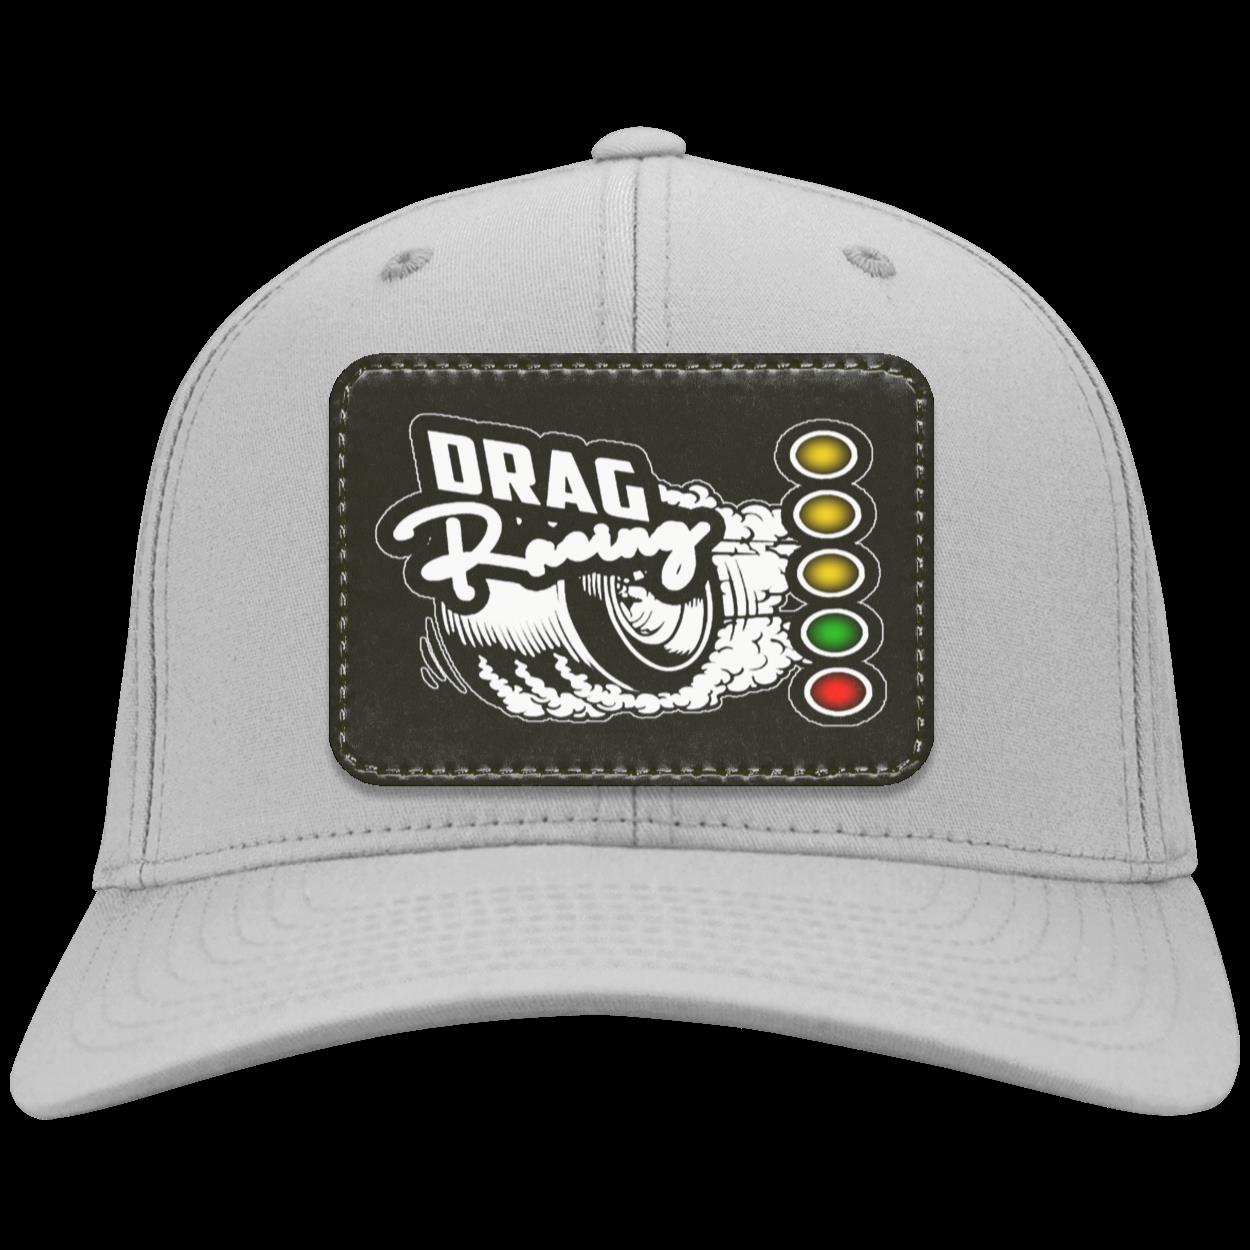 Drag Racing Patched Twill Cap V2